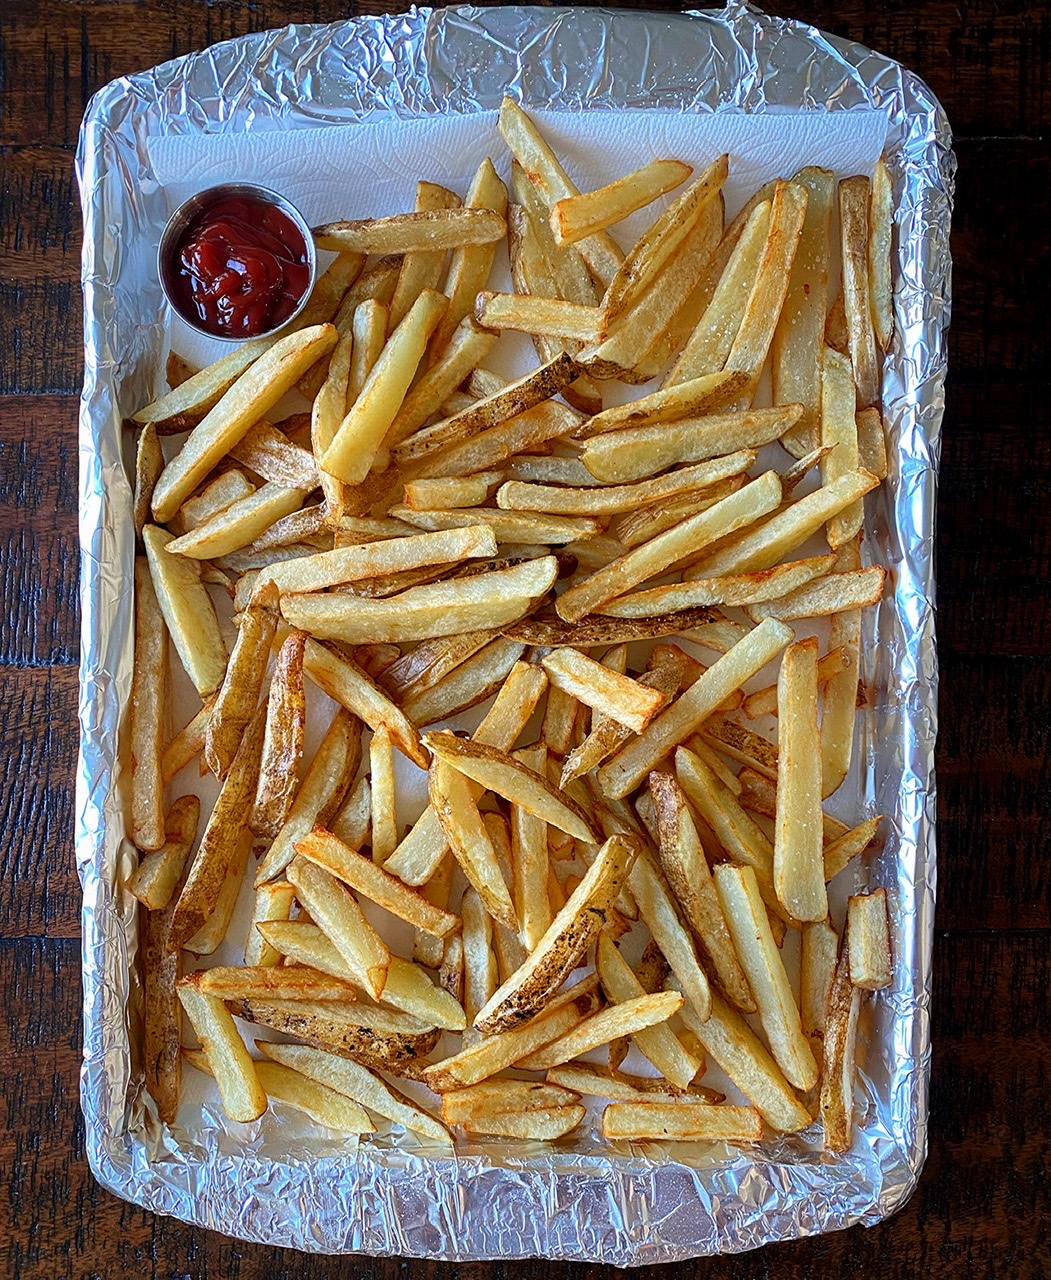 Homemade French Fries (Five Guys copycat)